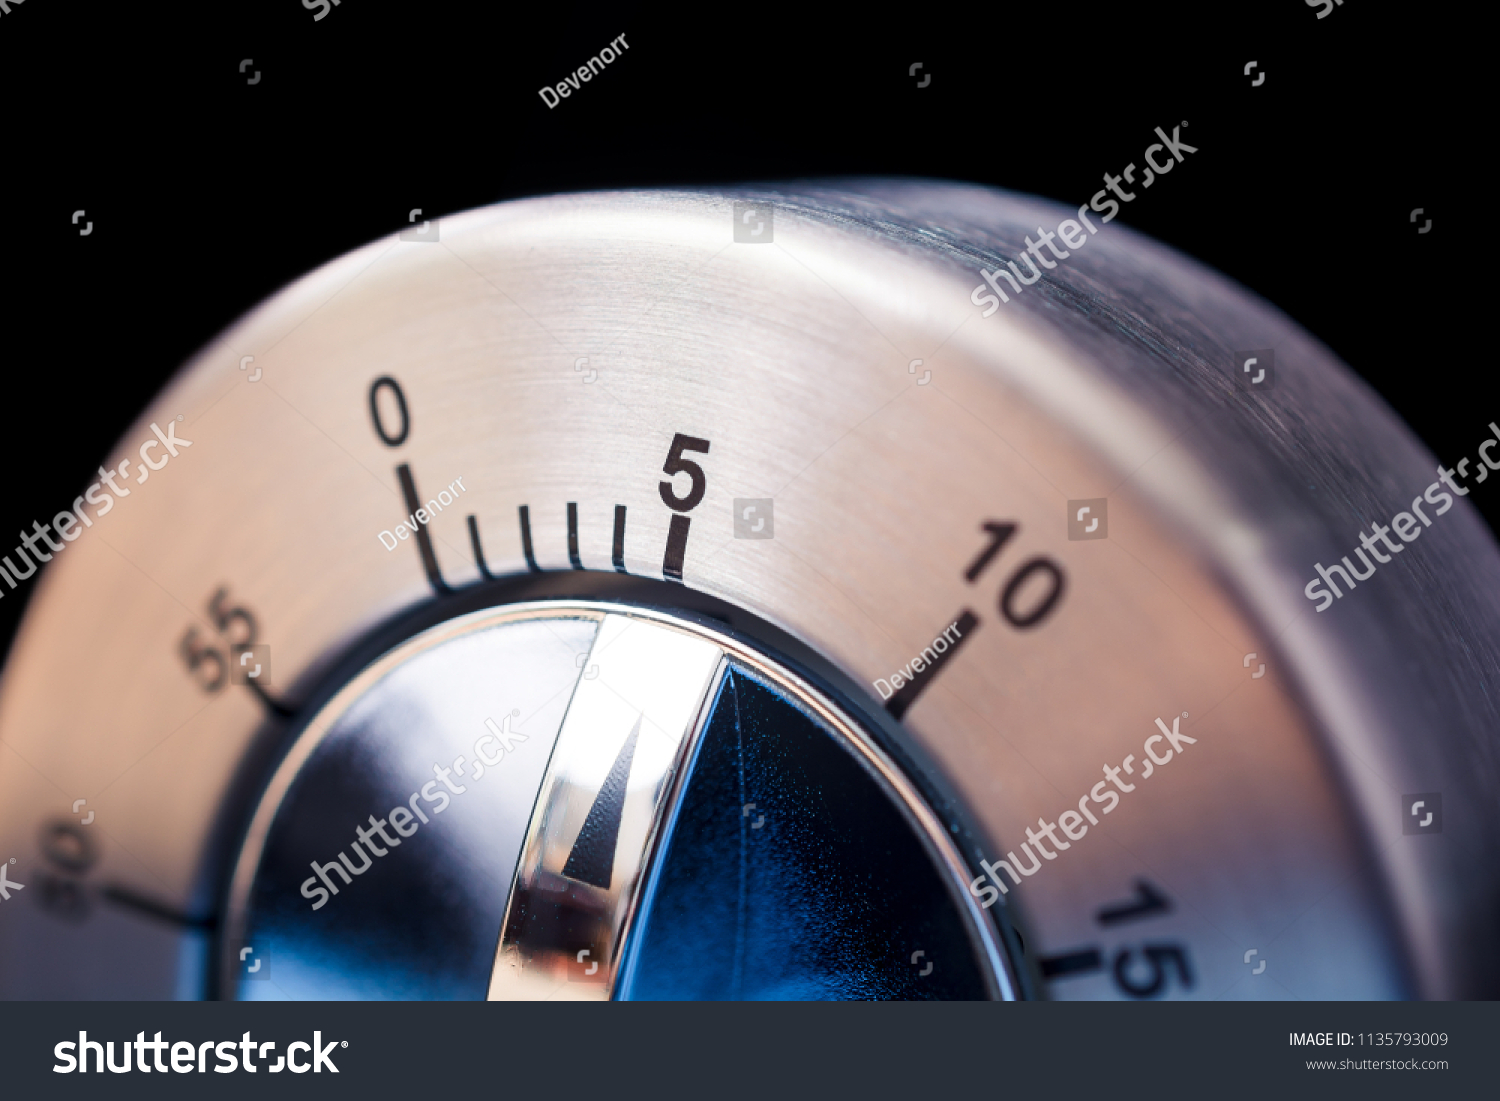 5 Minutes - Macro Of An Analog Chrome Kitchen Timer With Dark Background #1135793009